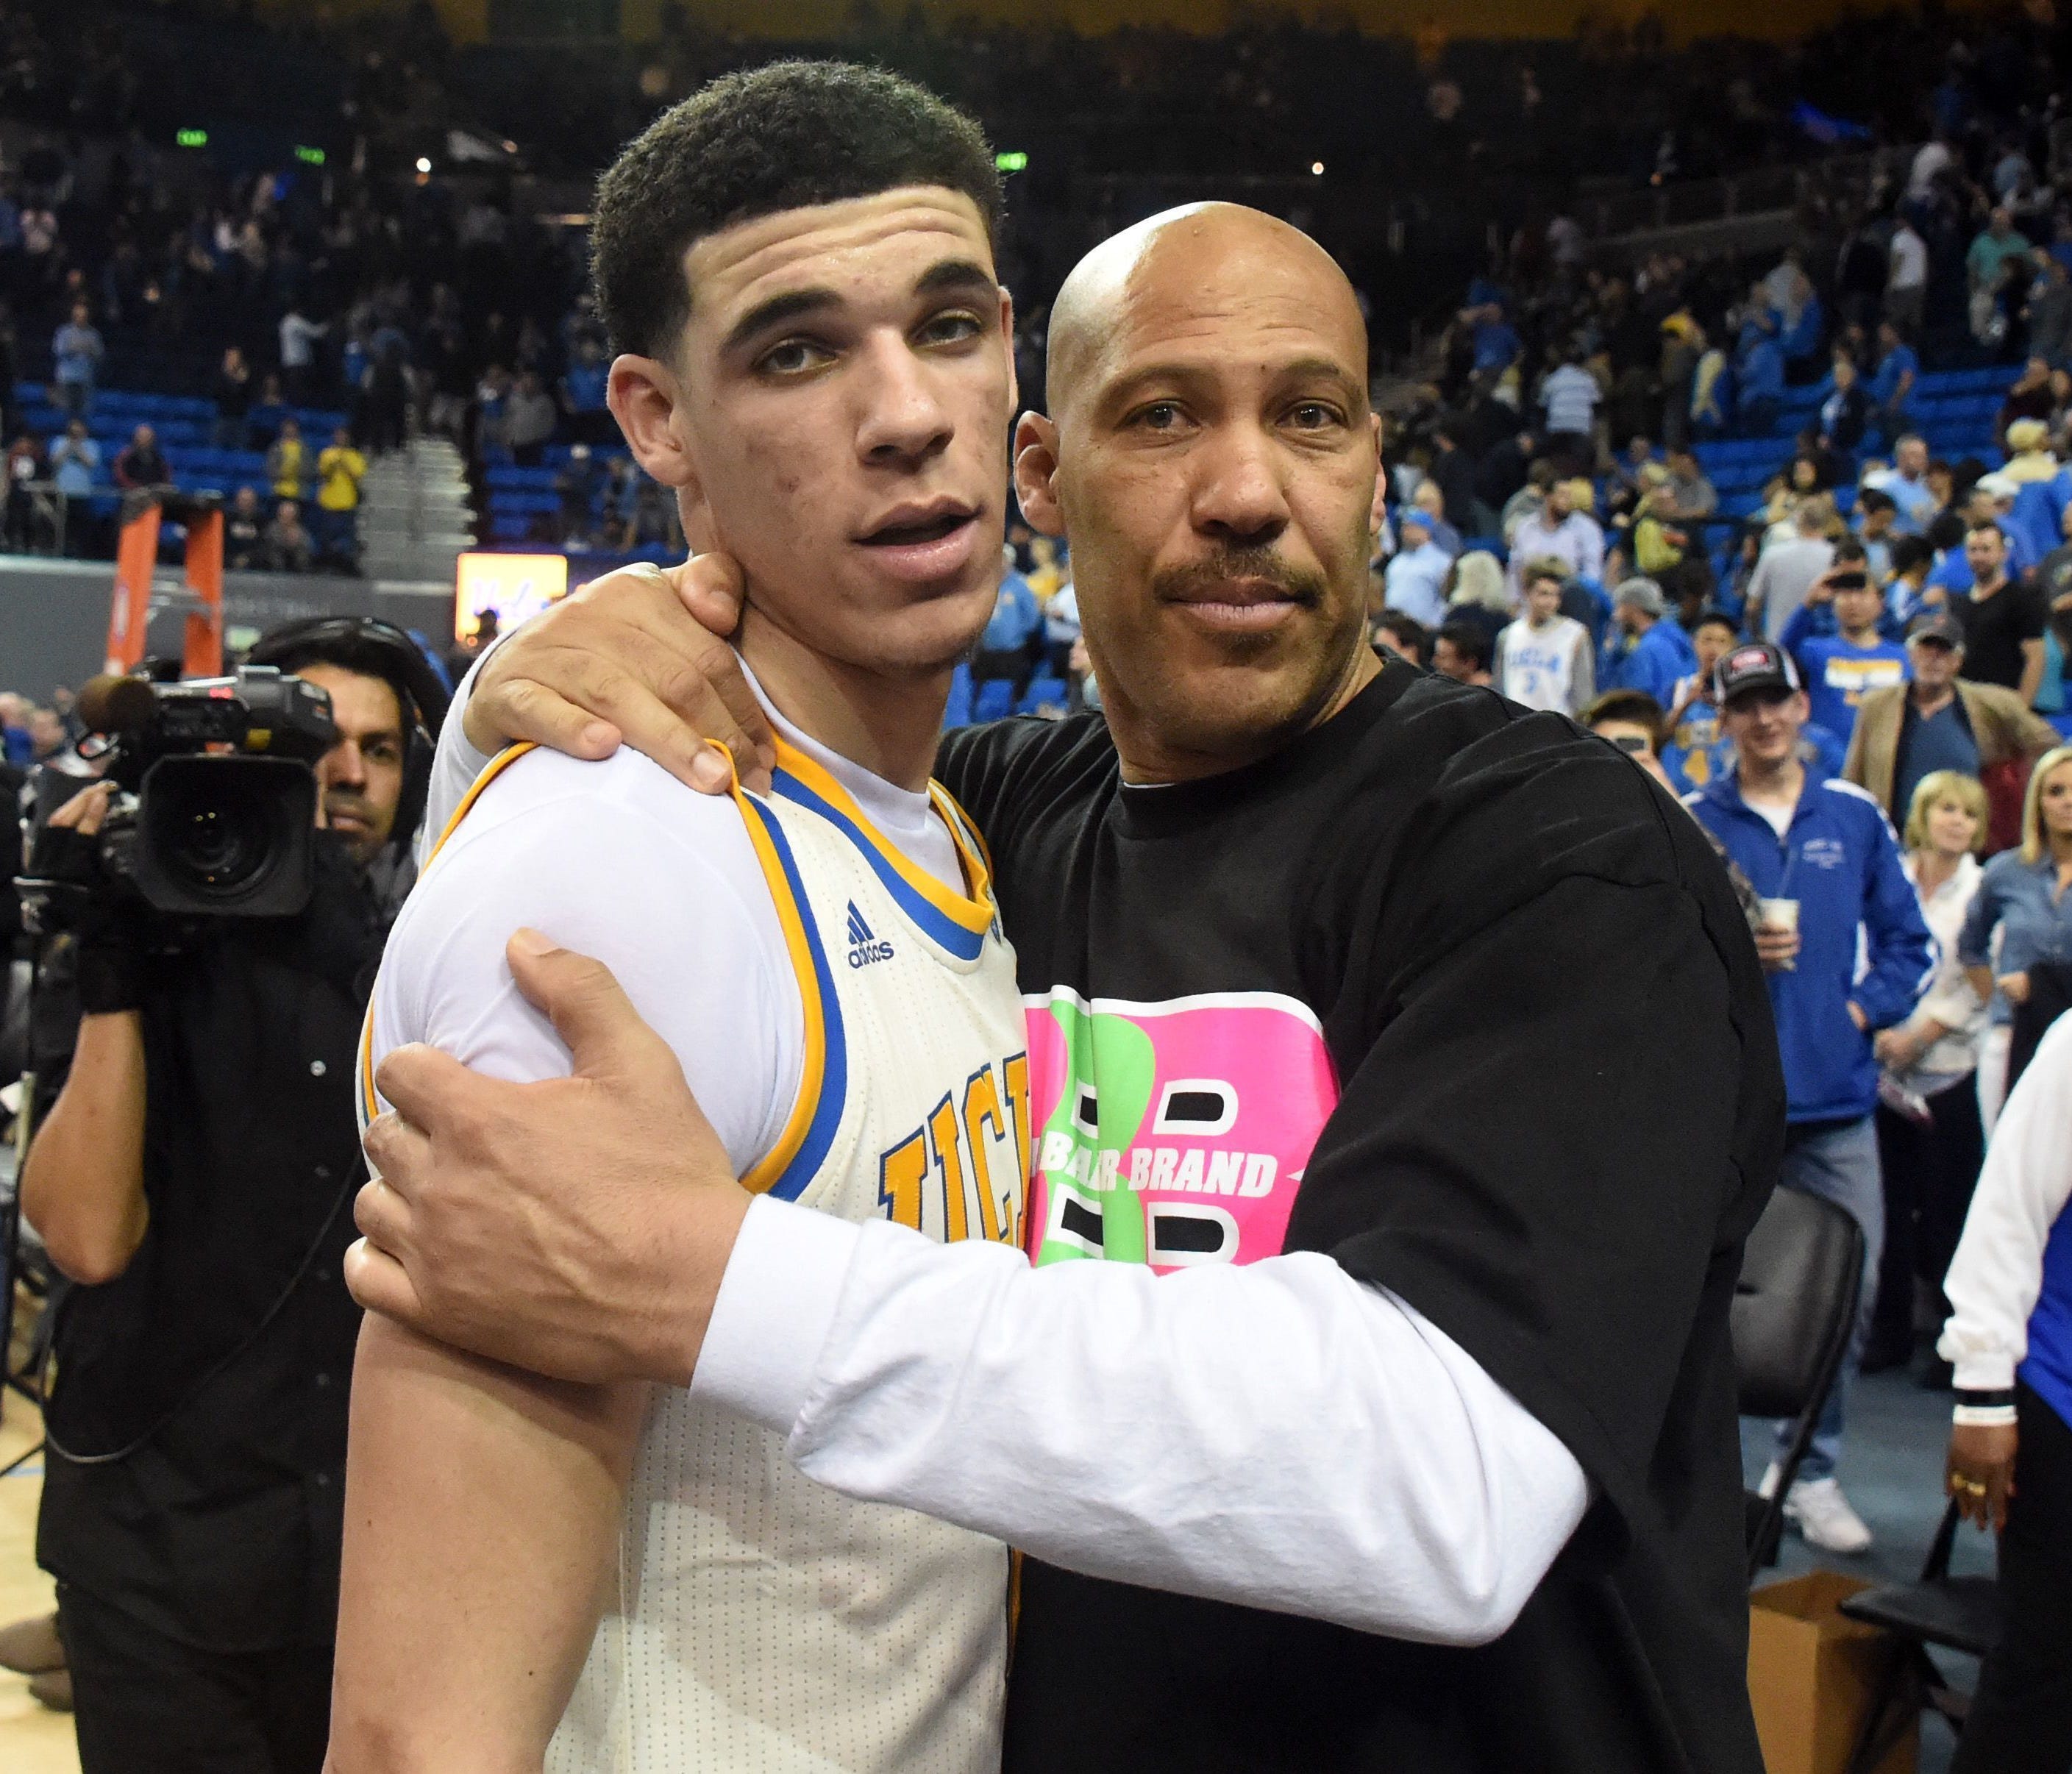 Lavar Ball embraces his son Lonzo after a game against Washington State.